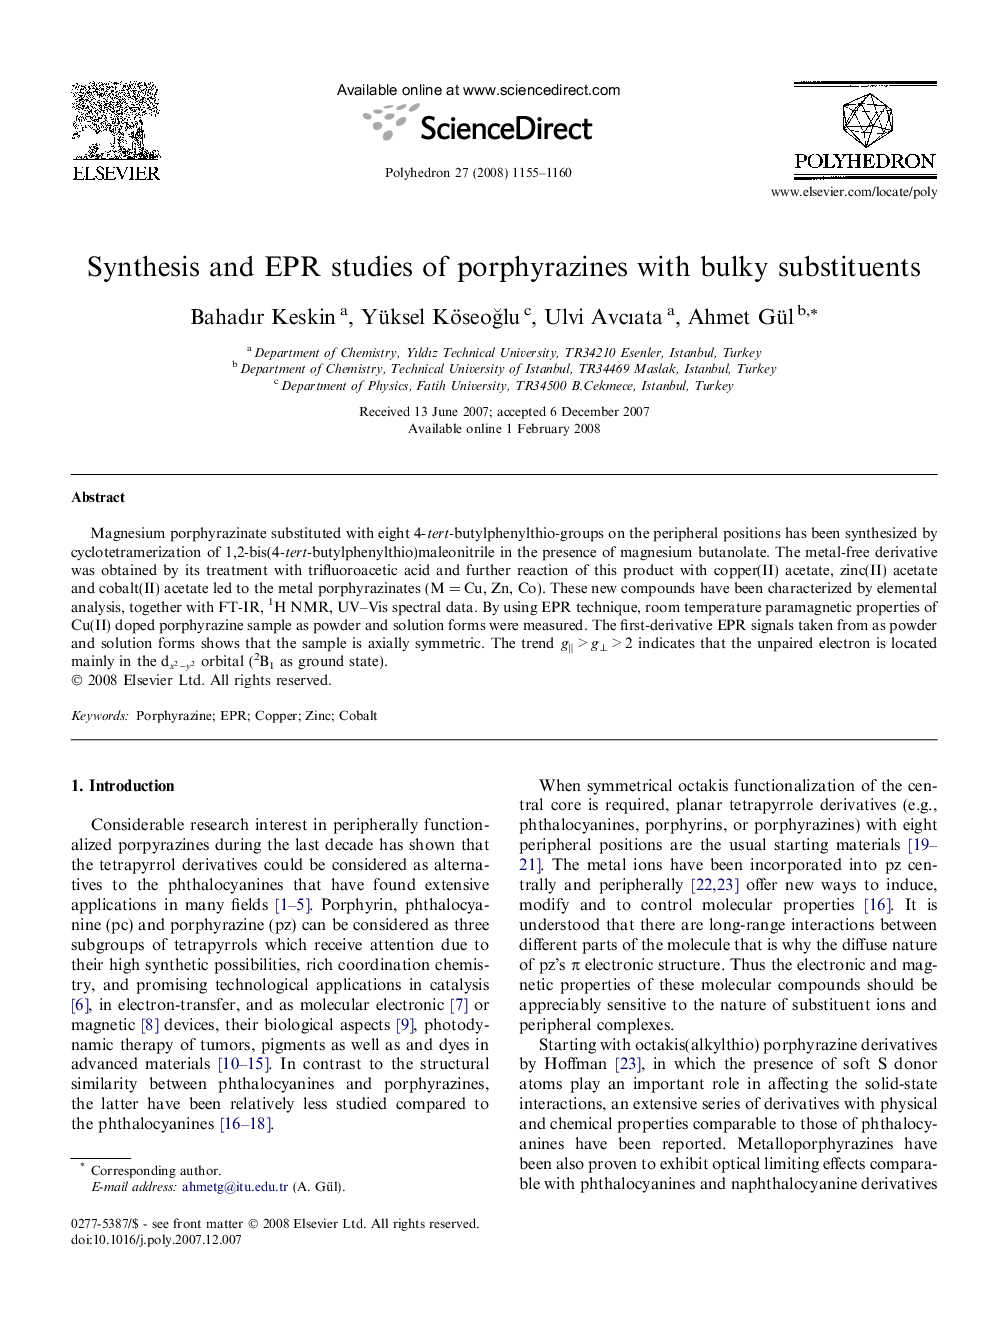 Synthesis and EPR studies of porphyrazines with bulky substituents